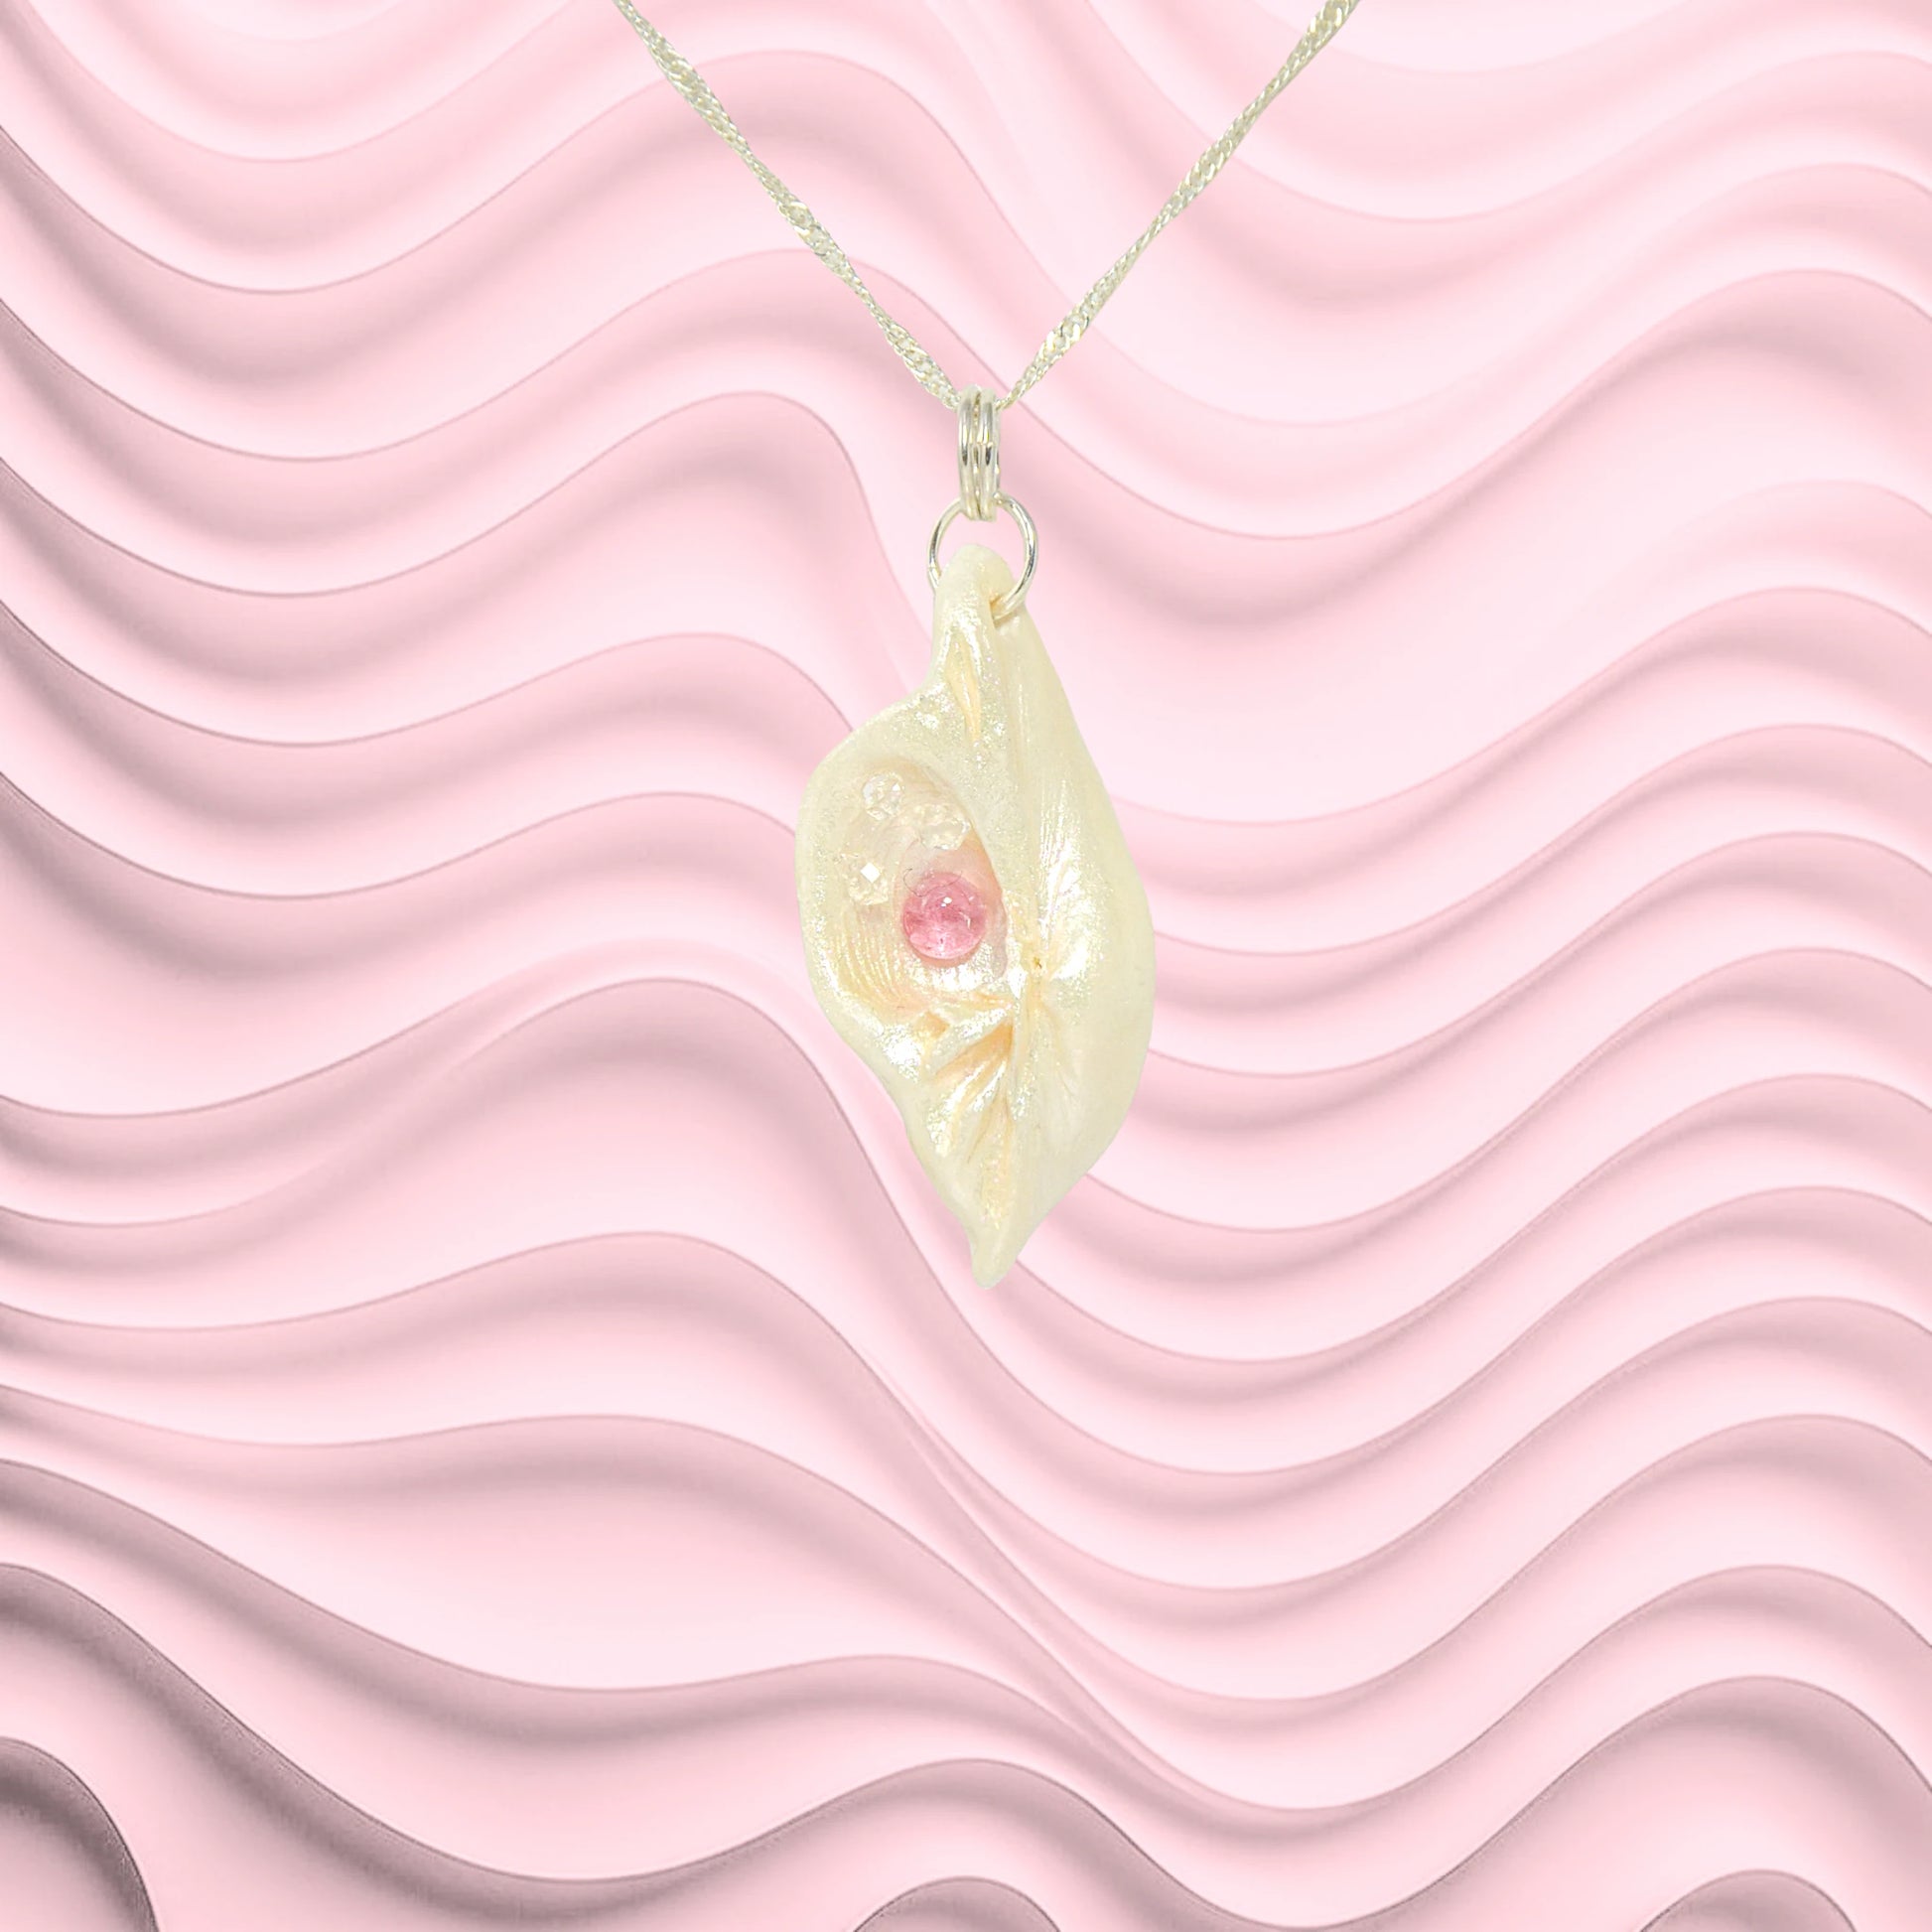 This natural seashell pendant has Pink Tourmaline gemstone and three Herkimer Diamonds that compliments the pendant.